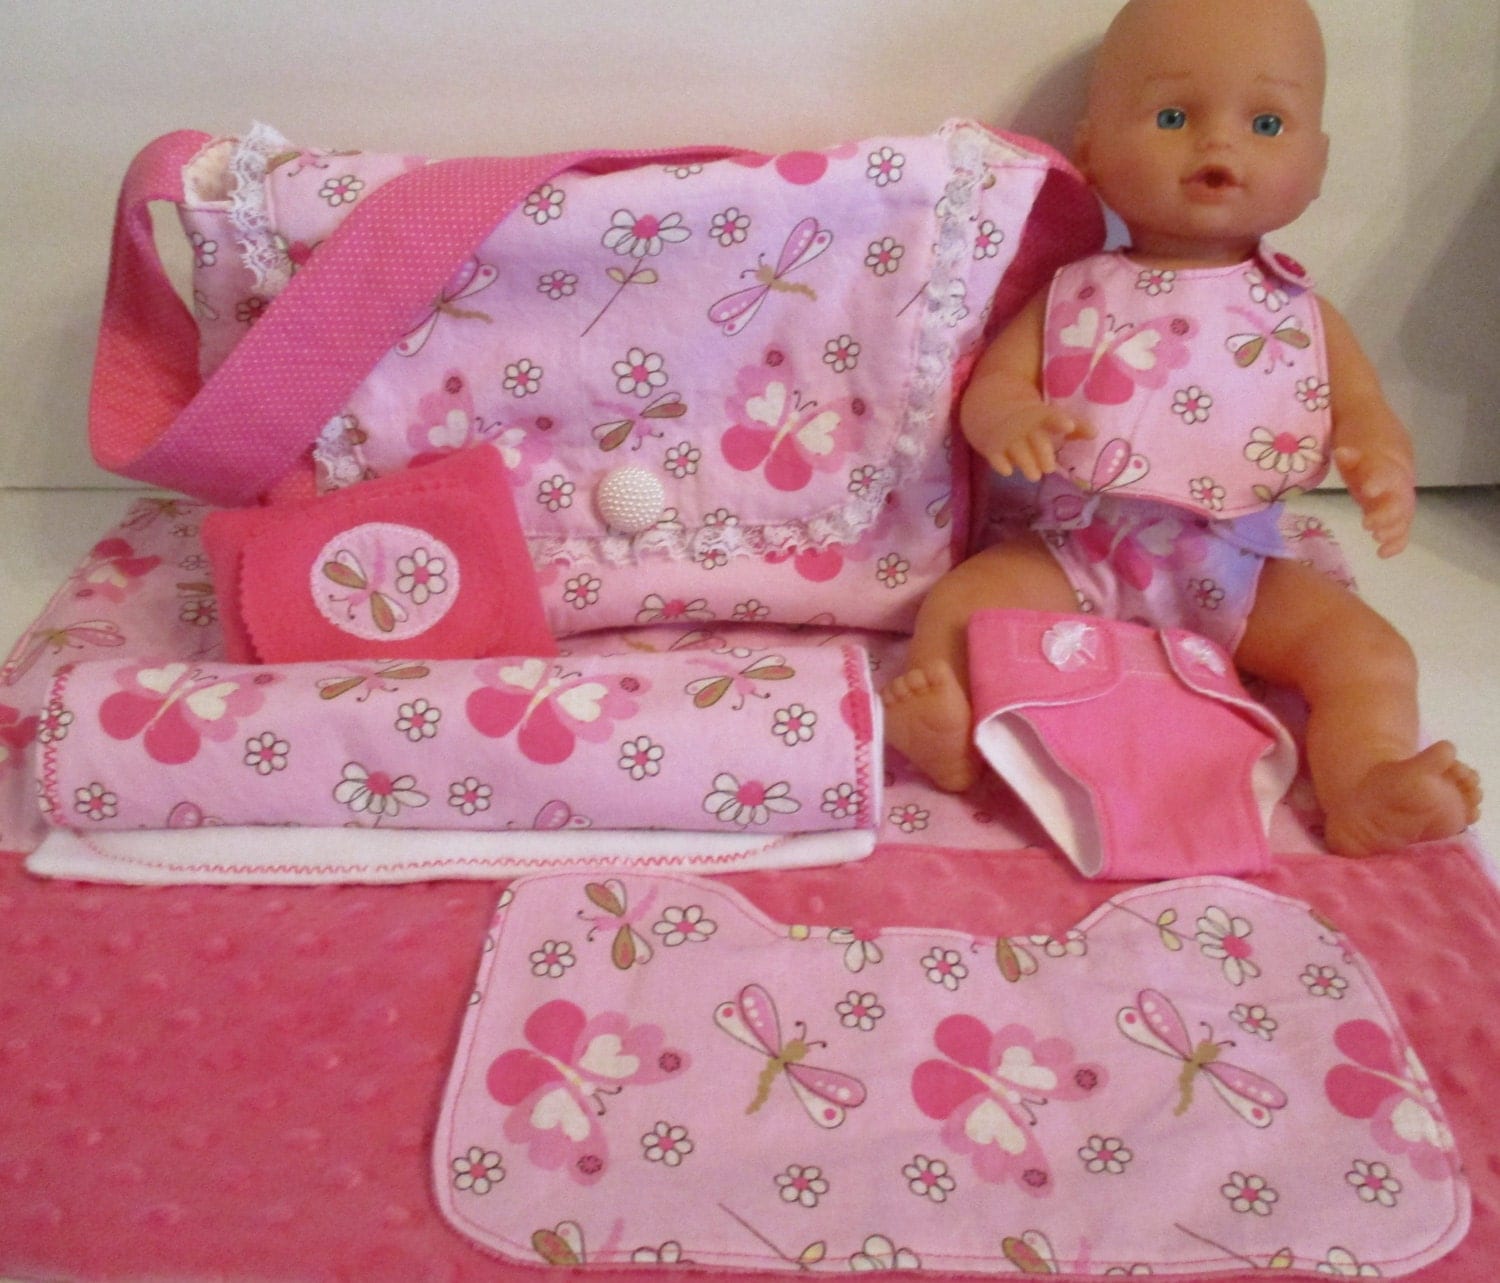 Baby Doll Diaper Bag and Accessories by KraftsbyAngandLiz on Etsy